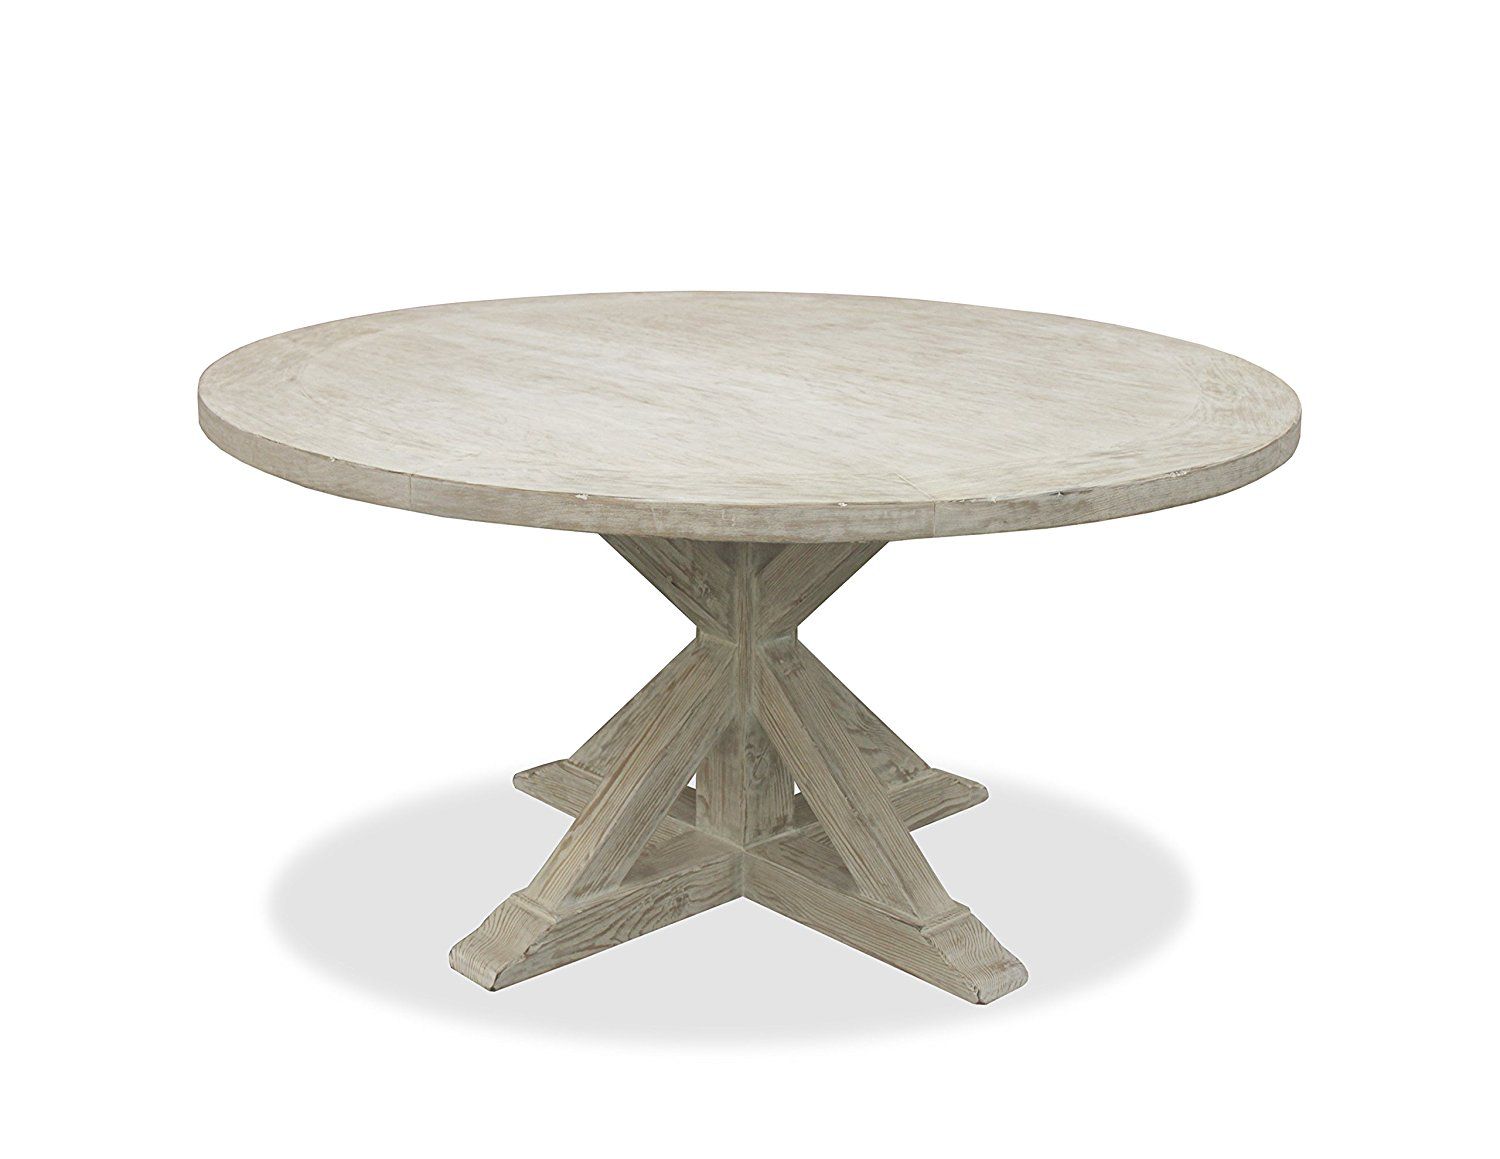 South Cone Home Bayliss Round Dining Table, 60", White